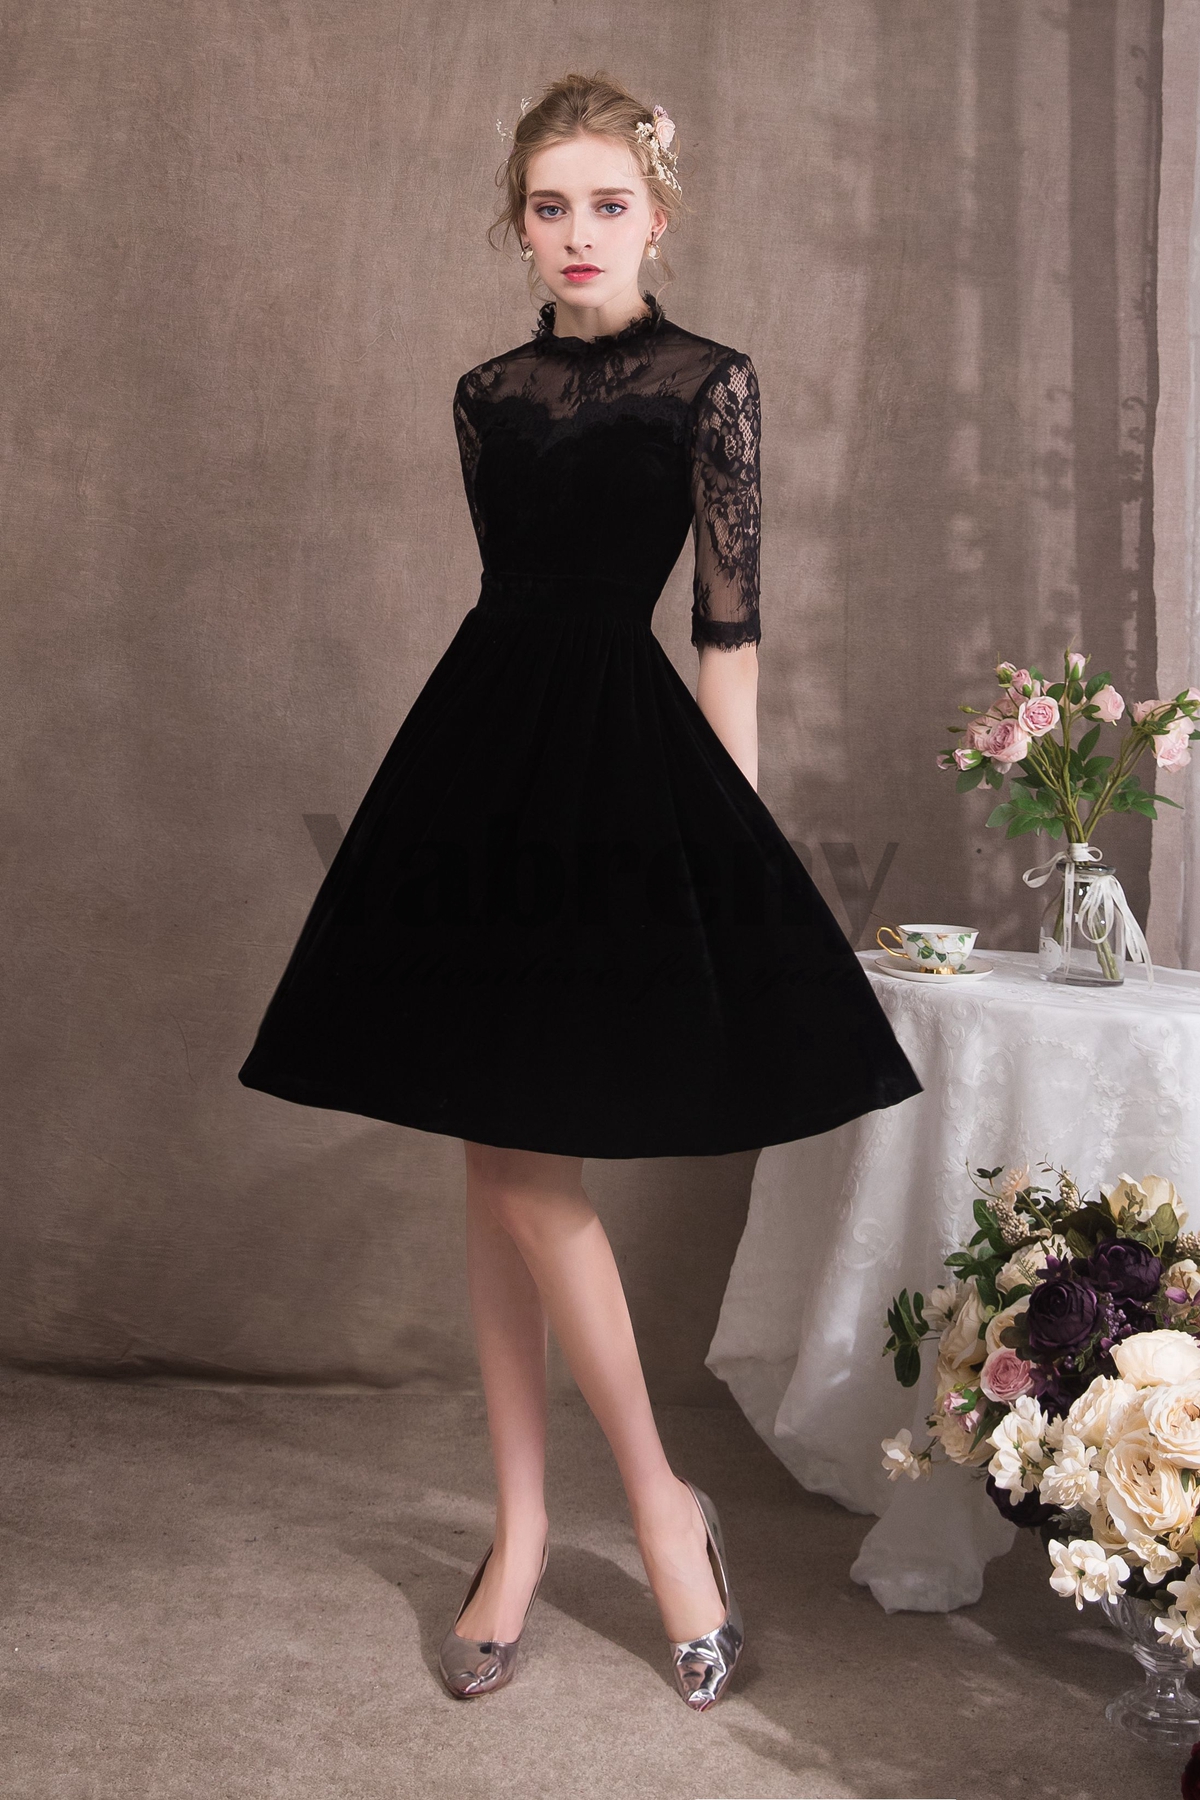 how to style black dress